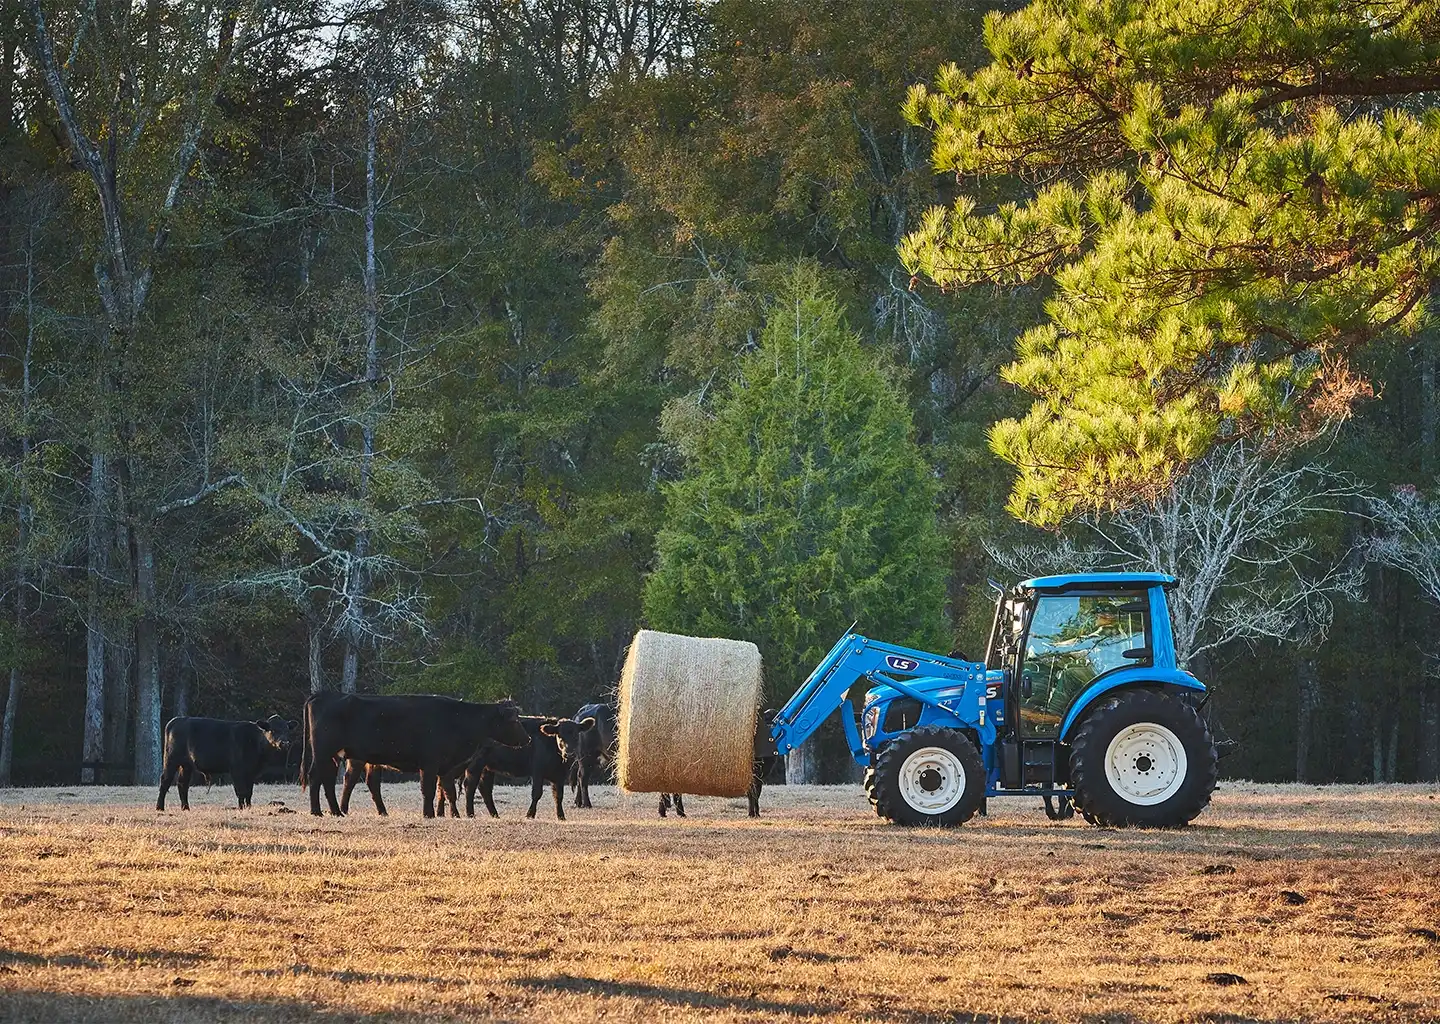 a tractor carrying a bale of hay with cows gathering